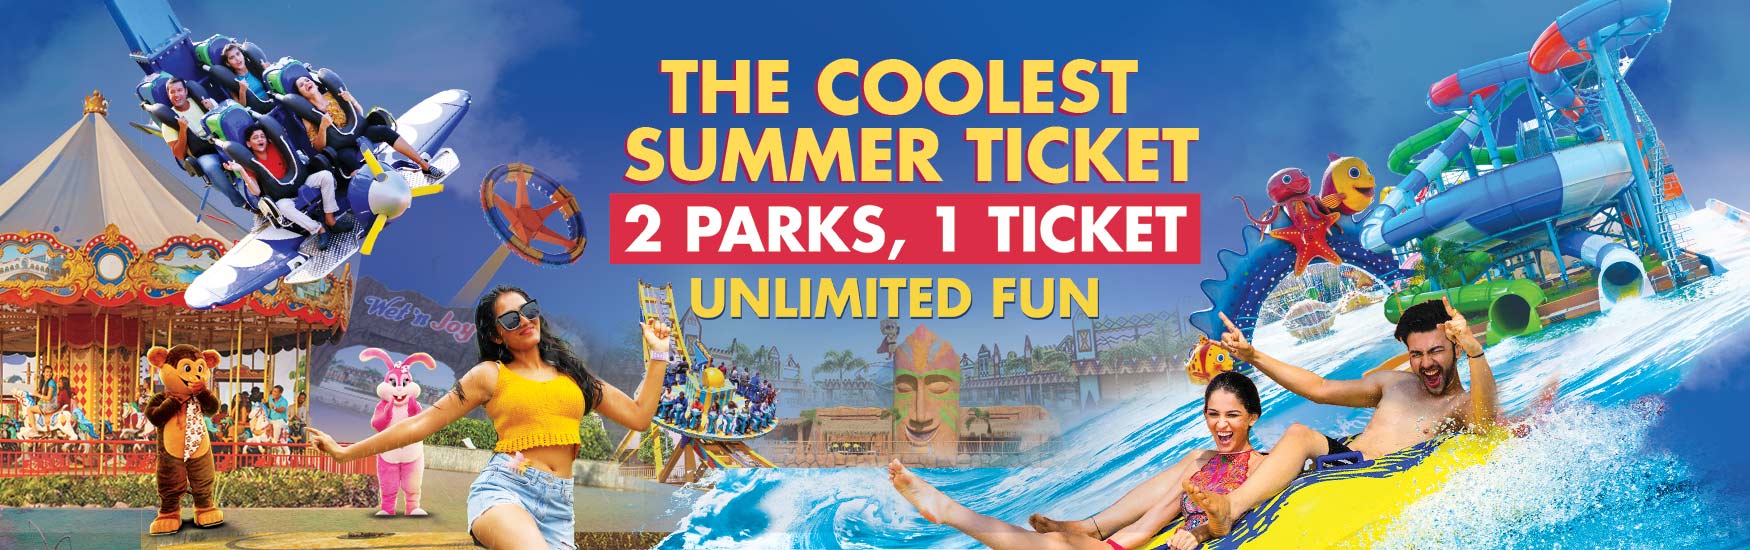 Unlimited Fun Every Thursday! Get Your Discounted Ticket Now!